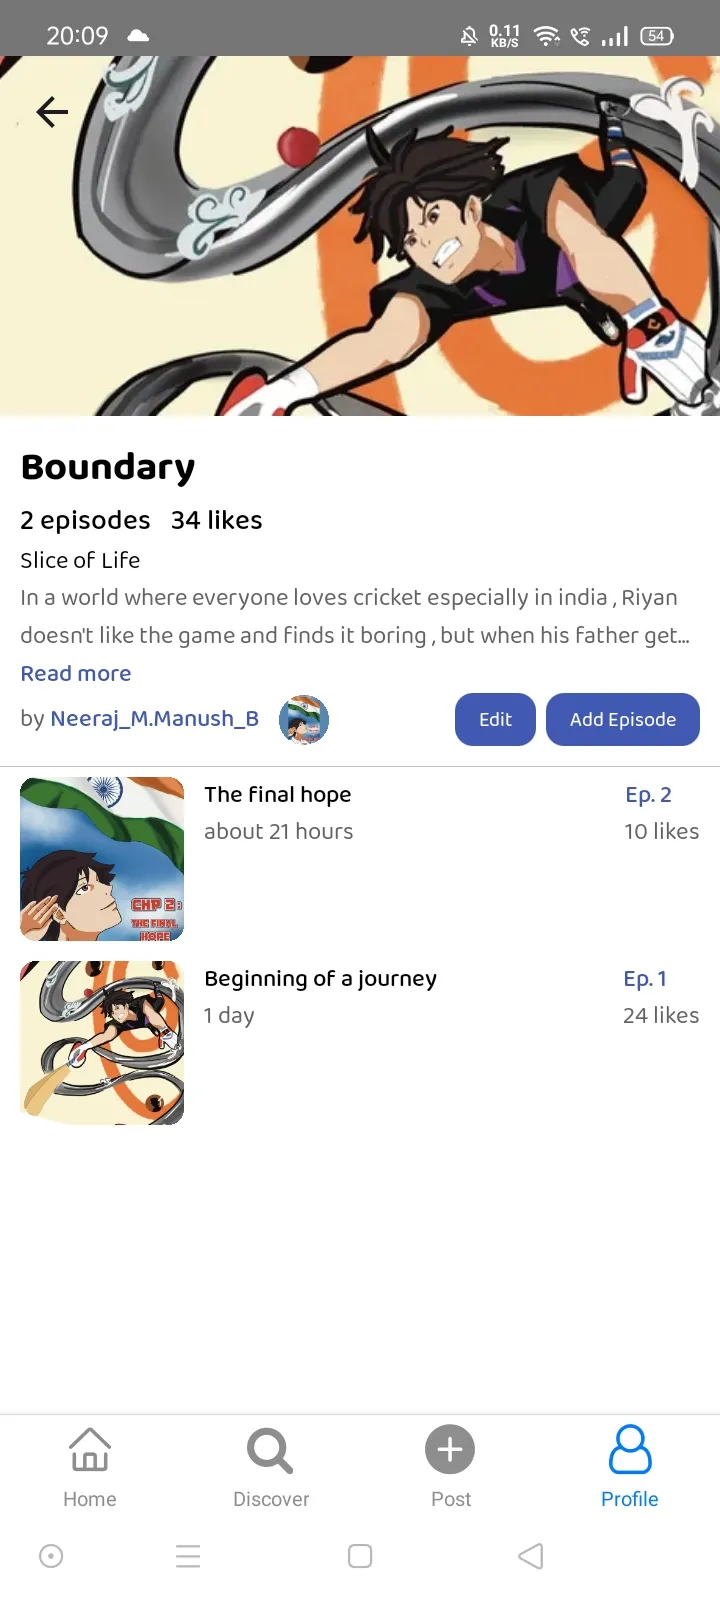 After one day of posting our manga ❤️🇮🇳